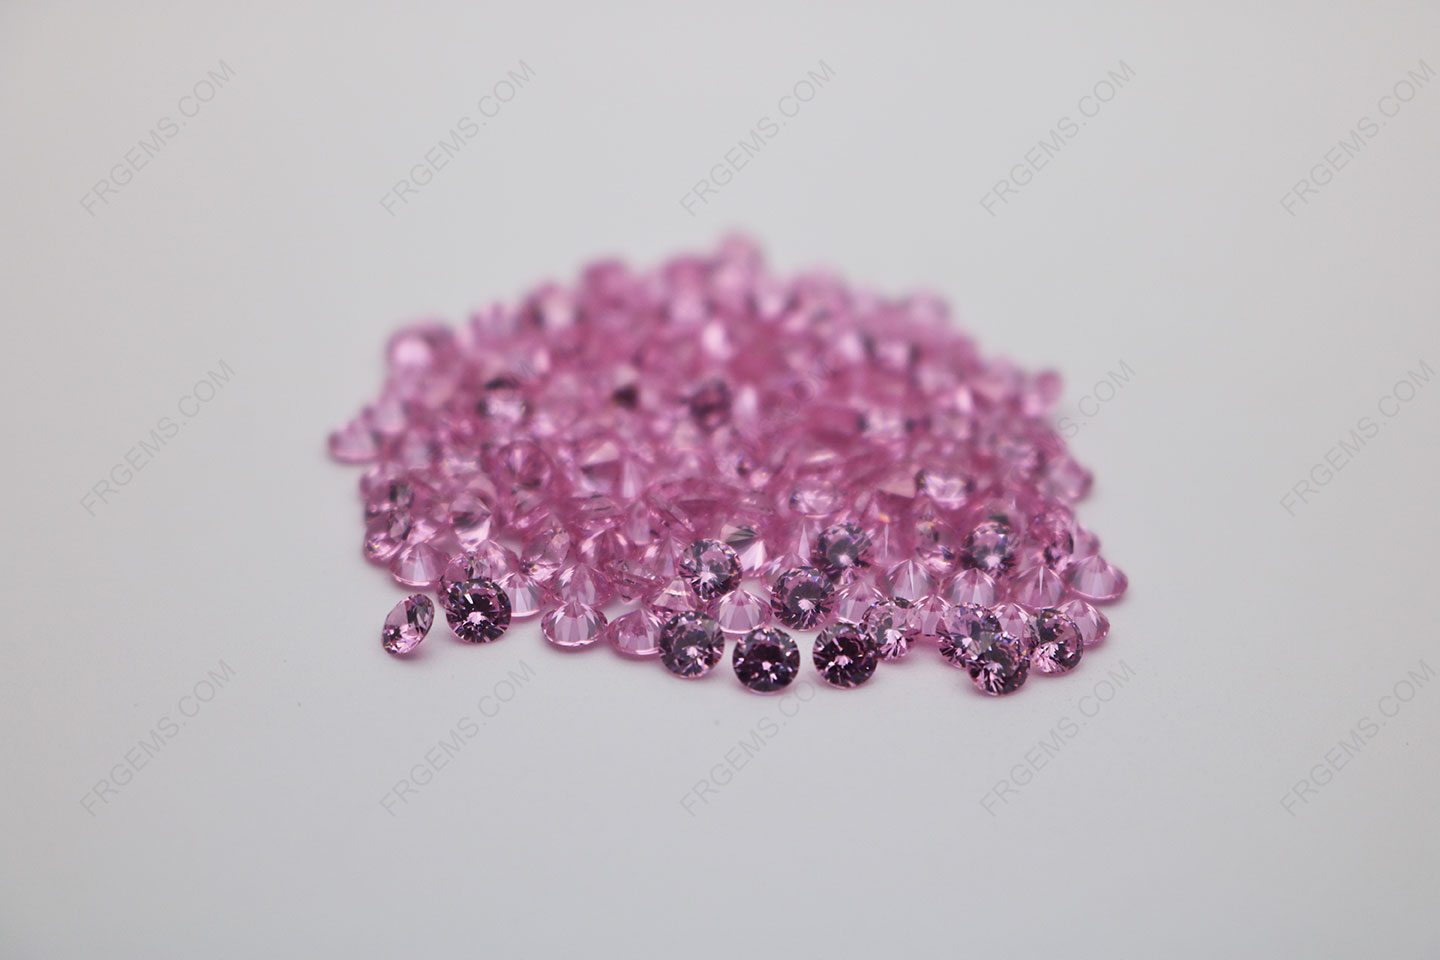 Cubic Zirconia Pink Round Shape diamond faceted cut 5mm stones CZ05 IMG_0344